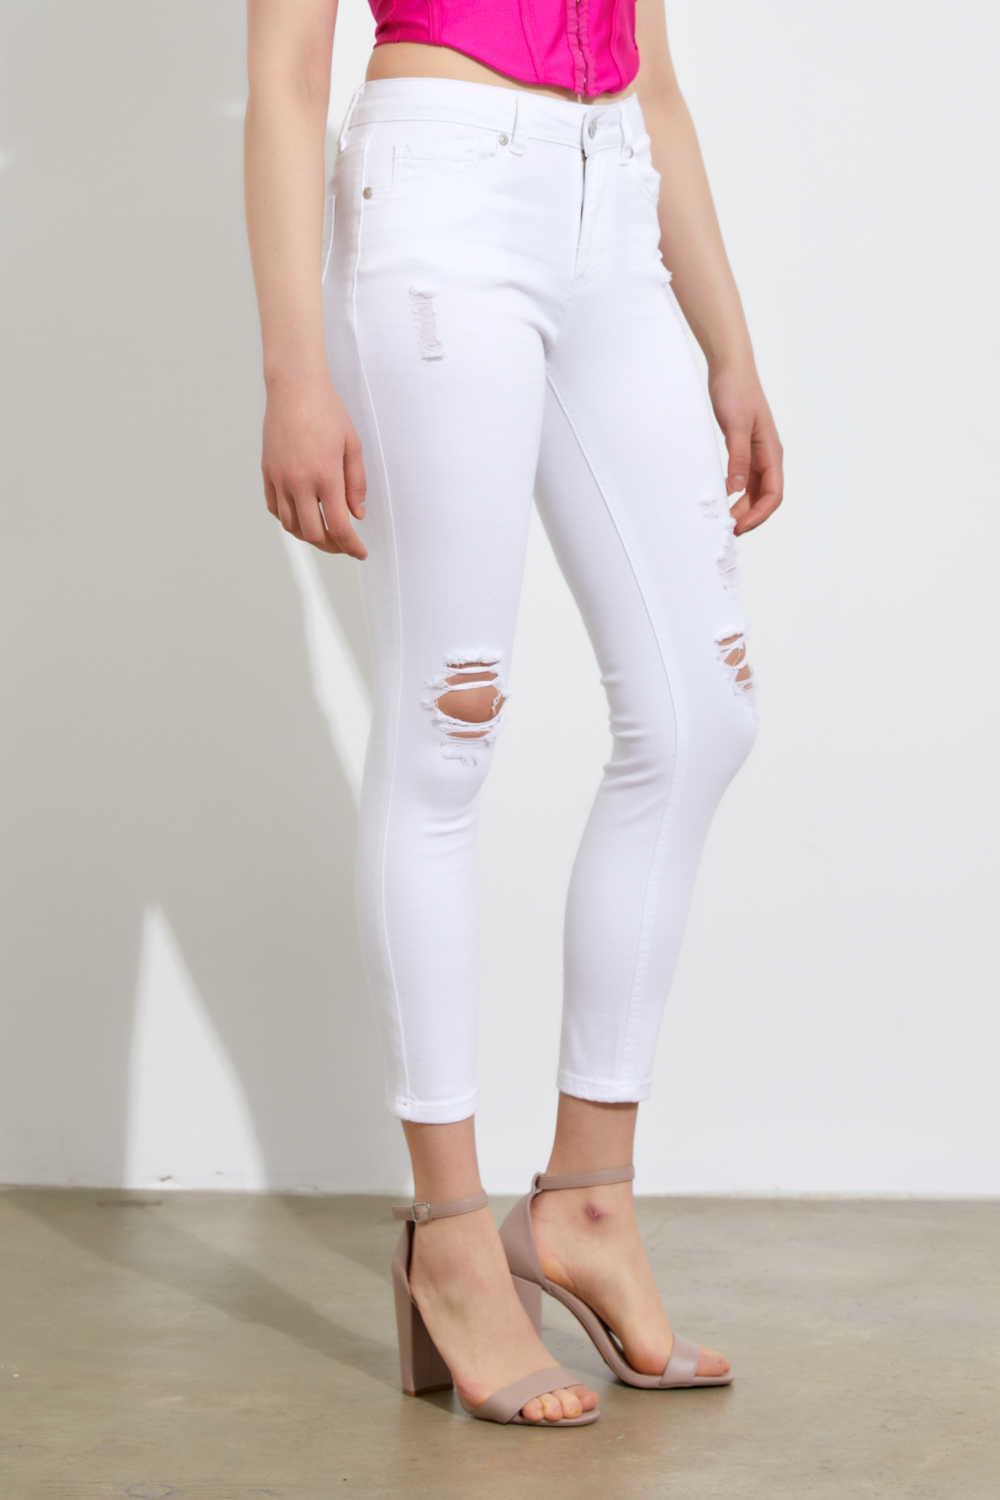 Distressed White Skinny Jeans